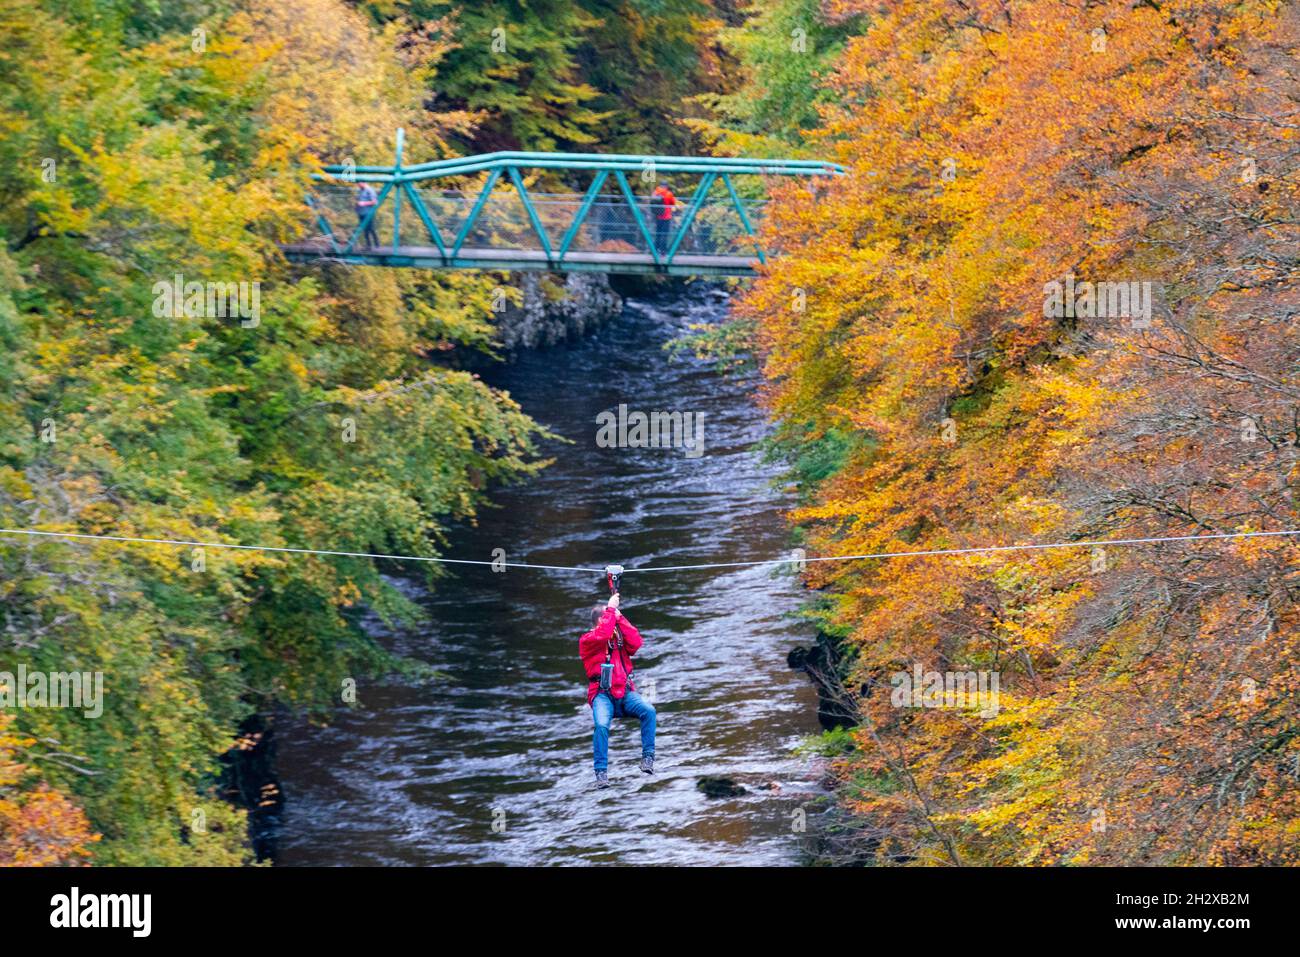 Pitlochry, Scotland, UK. 24th October 2021. A man on a zip-line crosses the River Garry near Killiecrankie surrounded by vibrant autumnal colours in the forest.   Iain Masterton/Alamy Live News. Stock Photo